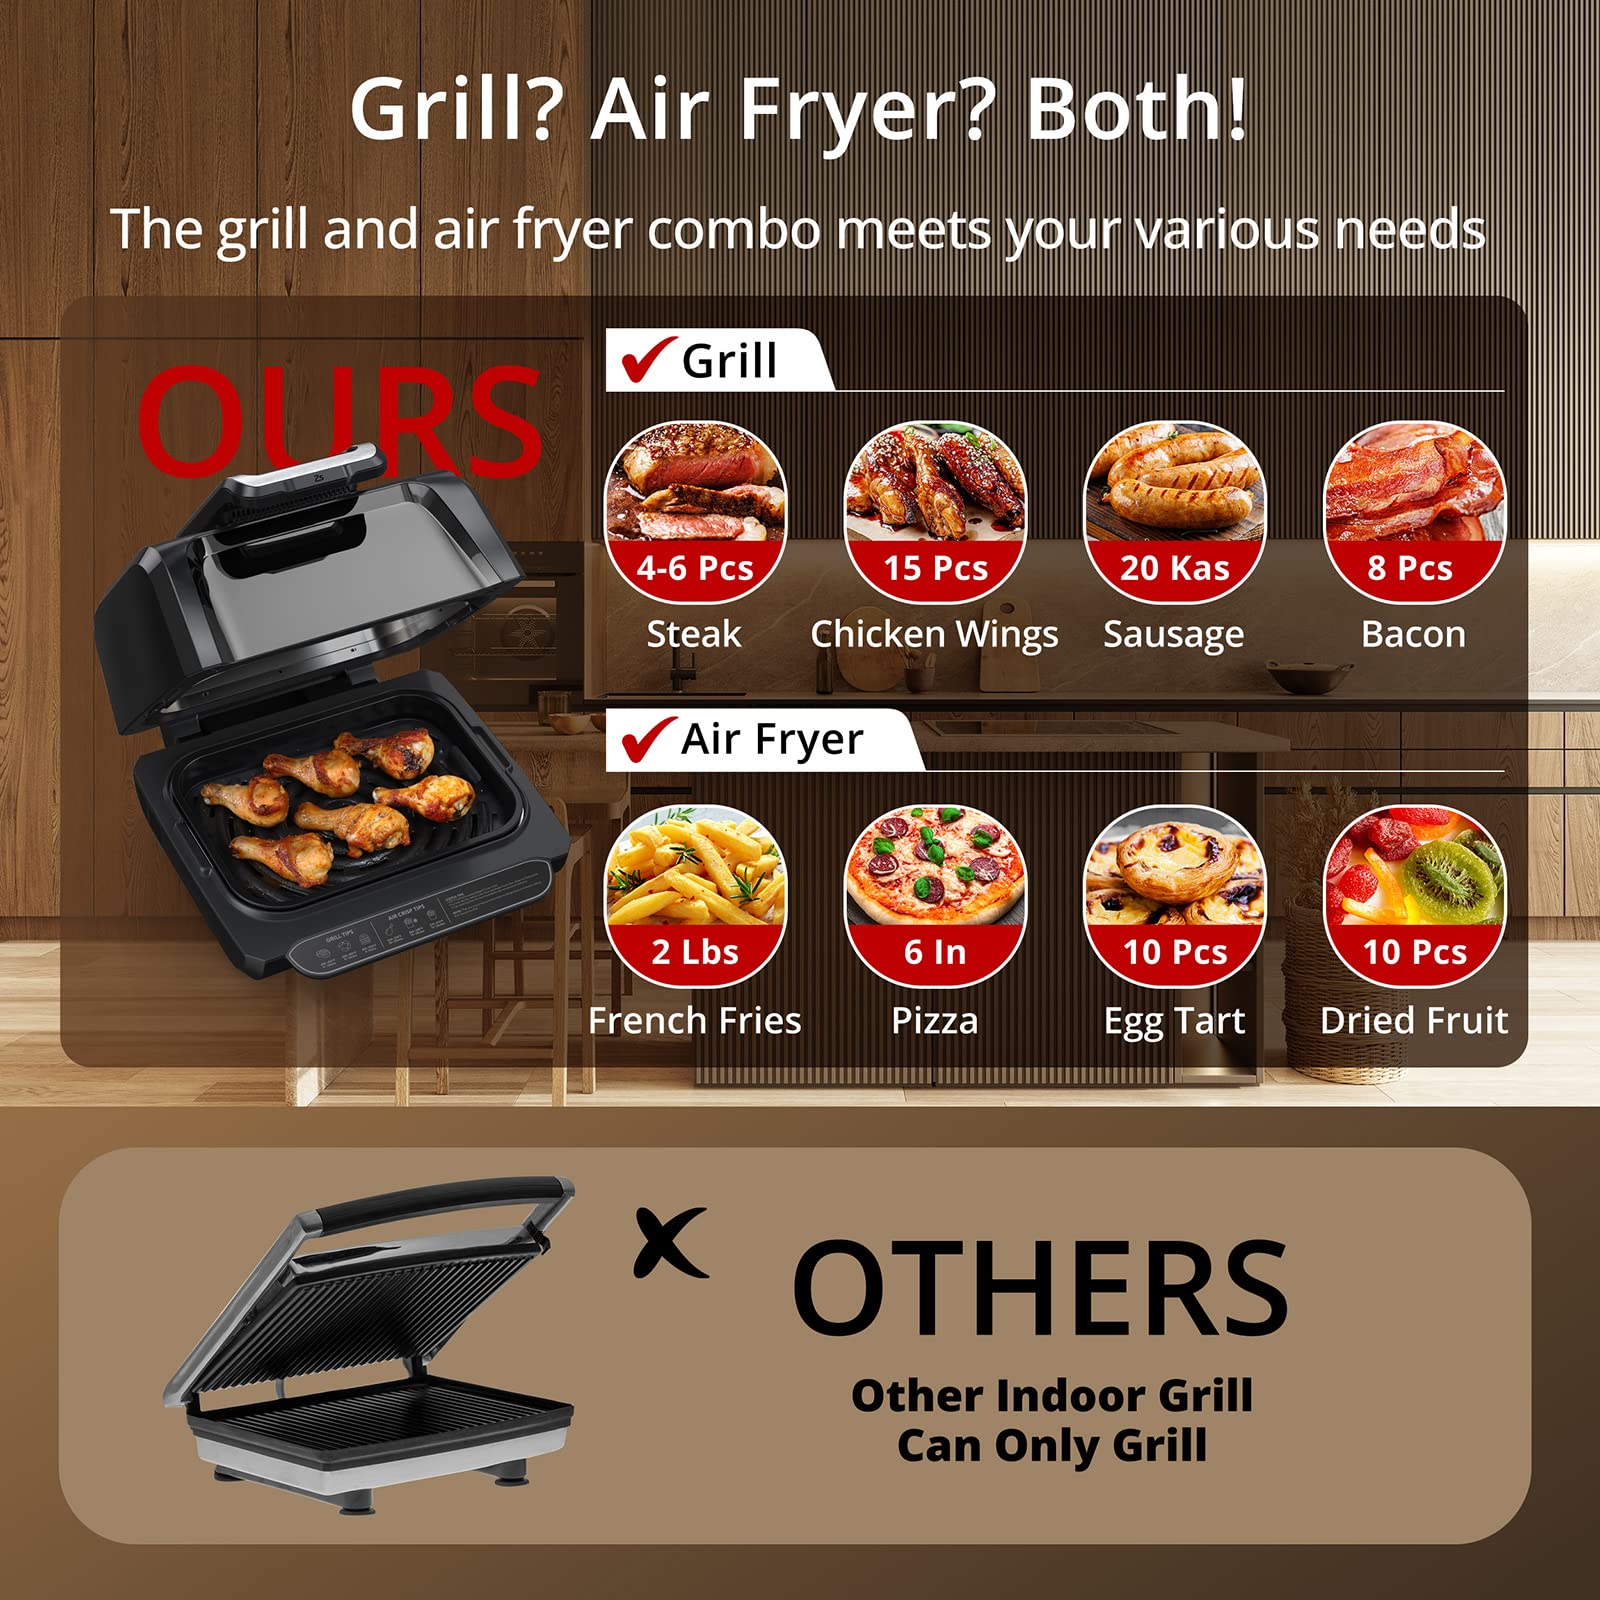 Zstar Indoor Grill Air Fryer Combo with See-Through Window, 7-in-1 Smokeless Electric Air Grill up to 450°F, 1750W Contact Grill with Non-Stick Removable Plates, Even Heat, Silicon Tongs as Gift, 4Qt